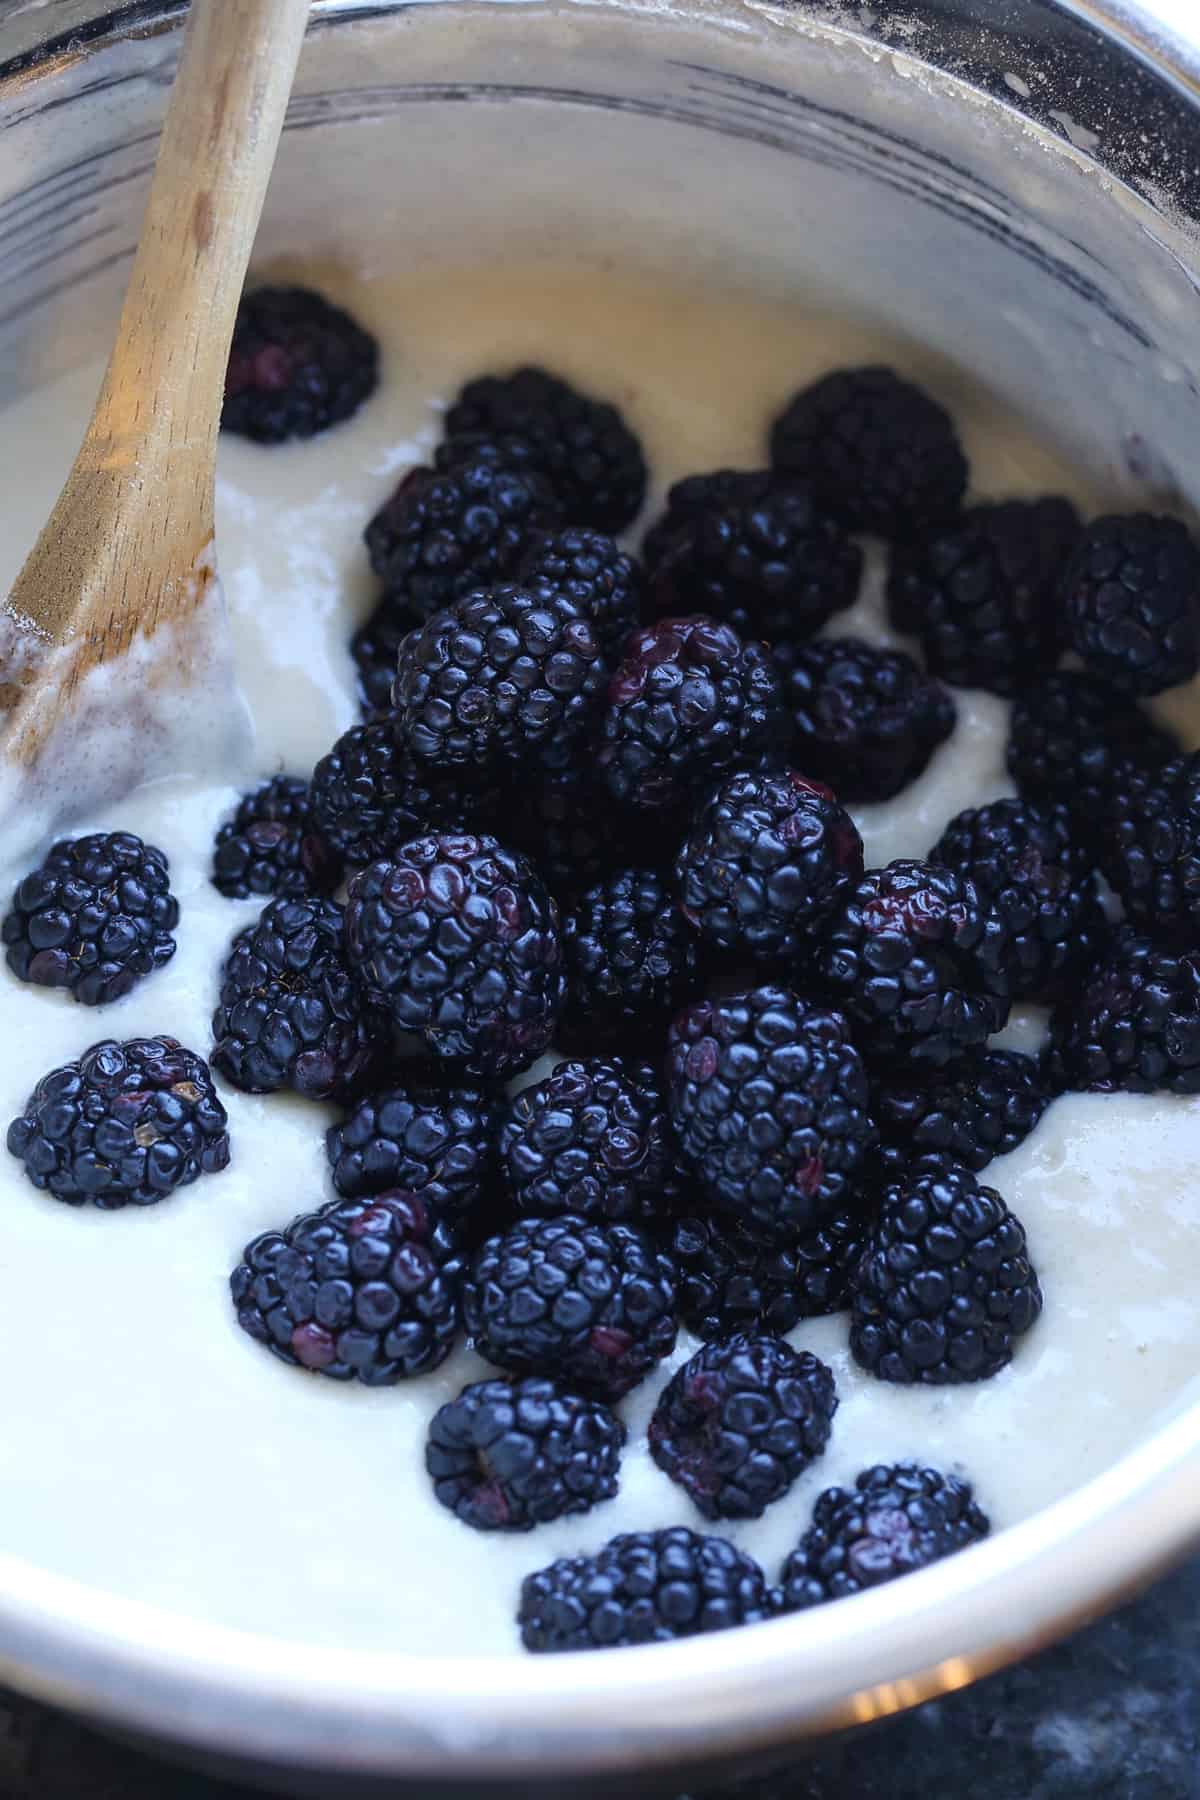 Blackberries being added to cake batter in a bowl with a wooden spoon.